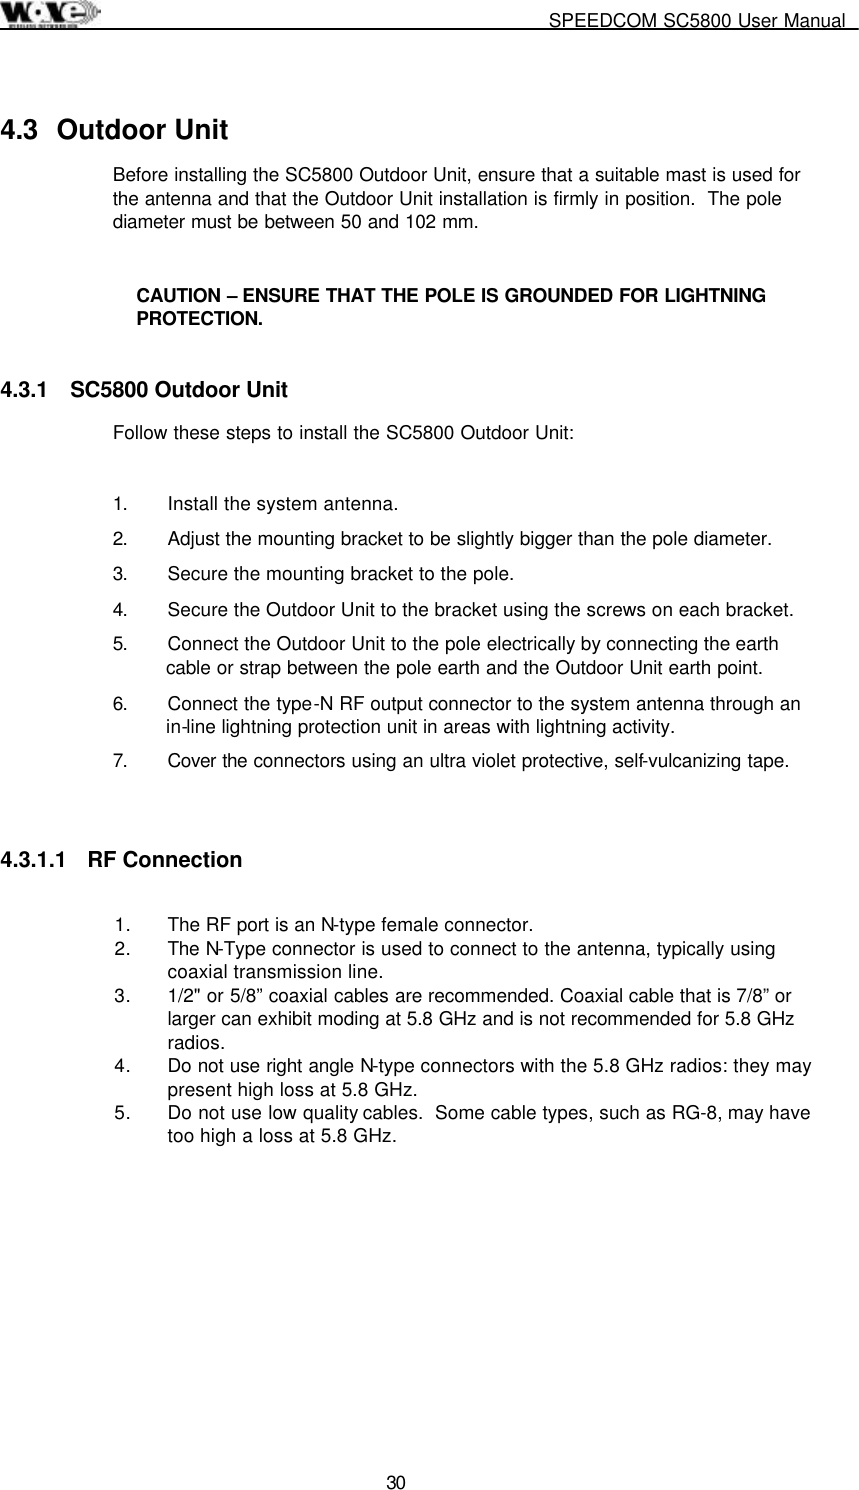     SPEEDCOM SC5800 User Manual  30 4.3 Outdoor Unit Before installing the SC5800 Outdoor Unit, ensure that a suitable mast is used for the antenna and that the Outdoor Unit installation is firmly in position.  The pole diameter must be between 50 and 102 mm.   CAUTION – ENSURE THAT THE POLE IS GROUNDED FOR LIGHTNING PROTECTION. 4.3.1  SC5800 Outdoor Unit Follow these steps to install the SC5800 Outdoor Unit:  1.  Install the system antenna. 2.  Adjust the mounting bracket to be slightly bigger than the pole diameter.  3.  Secure the mounting bracket to the pole. 4.  Secure the Outdoor Unit to the bracket using the screws on each bracket. 5.  Connect the Outdoor Unit to the pole electrically by connecting the earth cable or strap between the pole earth and the Outdoor Unit earth point. 6.  Connect the type-N RF output connector to the system antenna through an in-line lightning protection unit in areas with lightning activity. 7. Cover the connectors using an ultra violet protective, self-vulcanizing tape.  4.3.1.1 RF Connection  1.  The RF port is an N-type female connector.  2. The N-Type connector is used to connect to the antenna, typically using coaxial transmission line.  3.  1/2&quot; or 5/8” coaxial cables are recommended. Coaxial cable that is 7/8” or larger can exhibit moding at 5.8 GHz and is not recommended for 5.8 GHz radios.  4.  Do not use right angle N-type connectors with the 5.8 GHz radios: they may present high loss at 5.8 GHz.  5.  Do not use low quality cables.  Some cable types, such as RG-8, may have too high a loss at 5.8 GHz.  